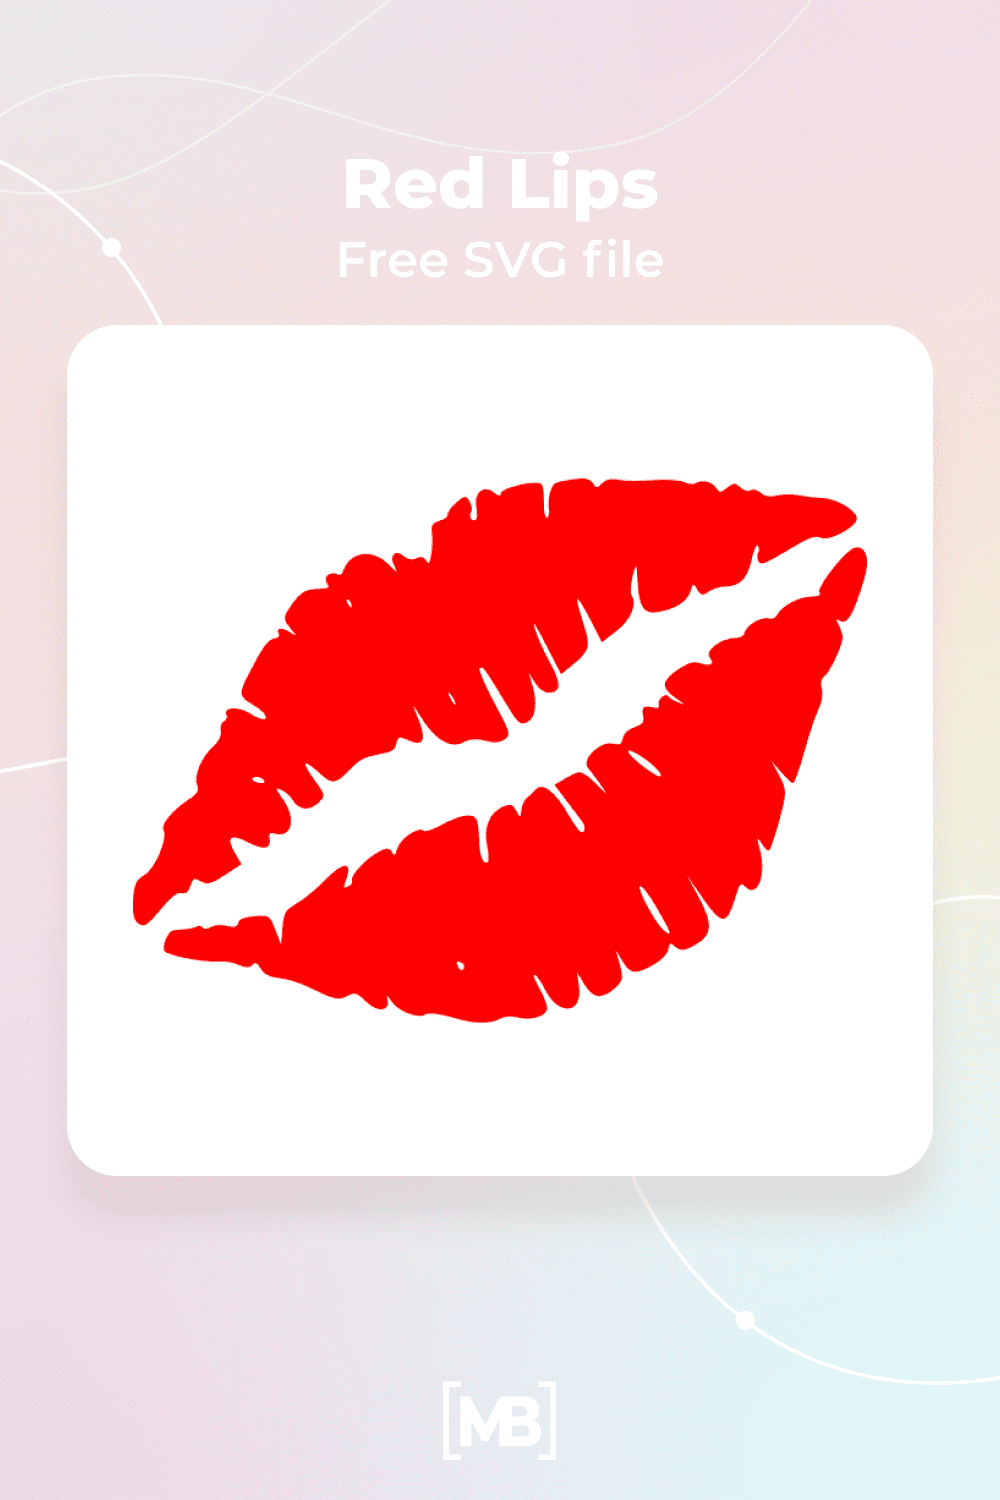 Free red lips SVG file.